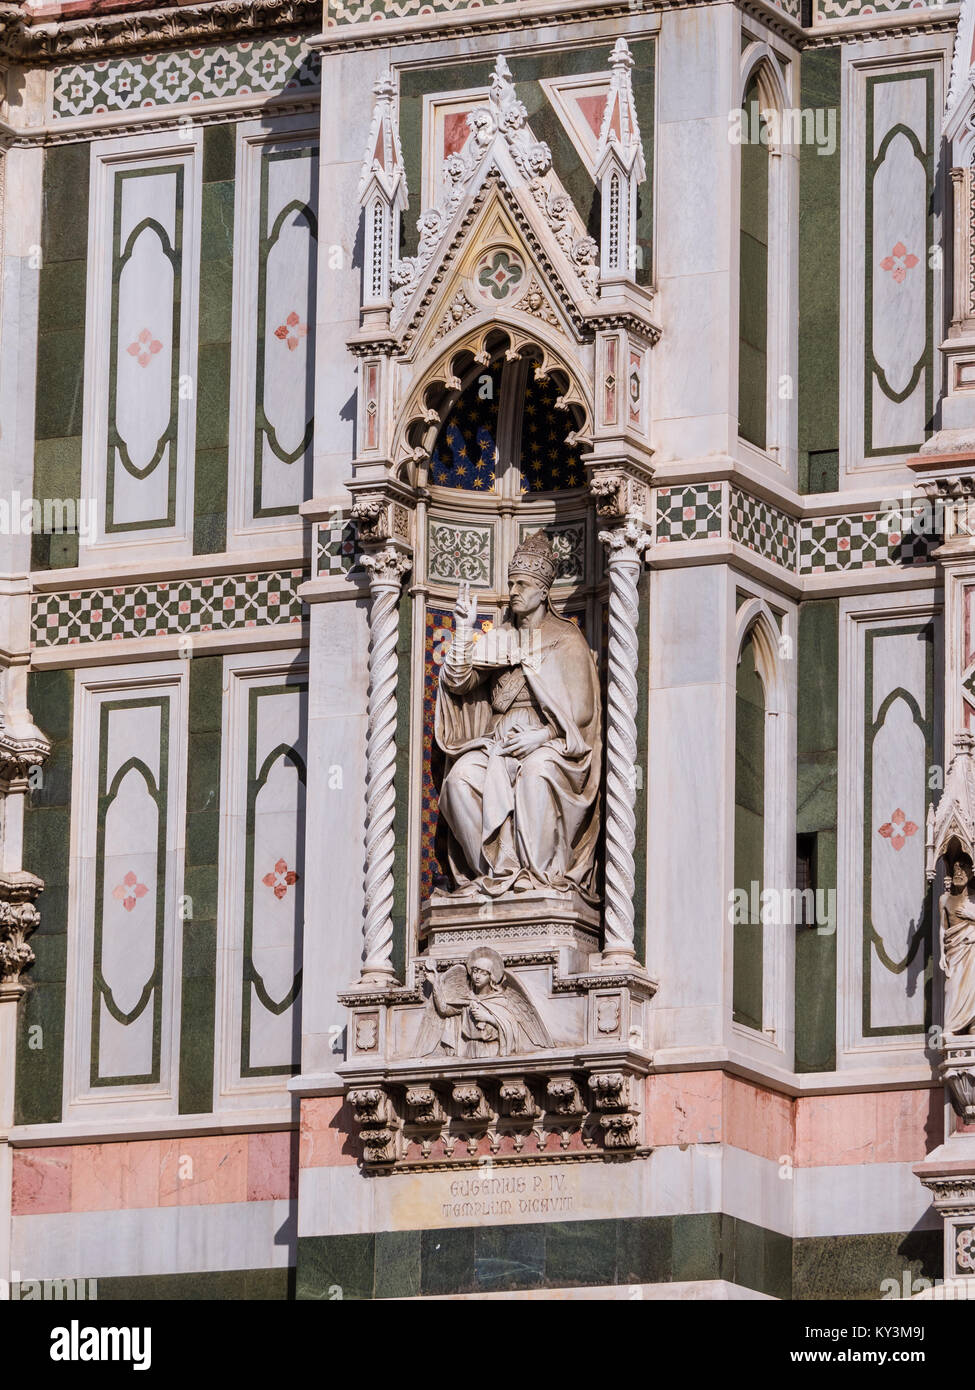 Sculpture of pope Eugenius IV on the facade of the Cathedral of Florence, Italy Stock Photo